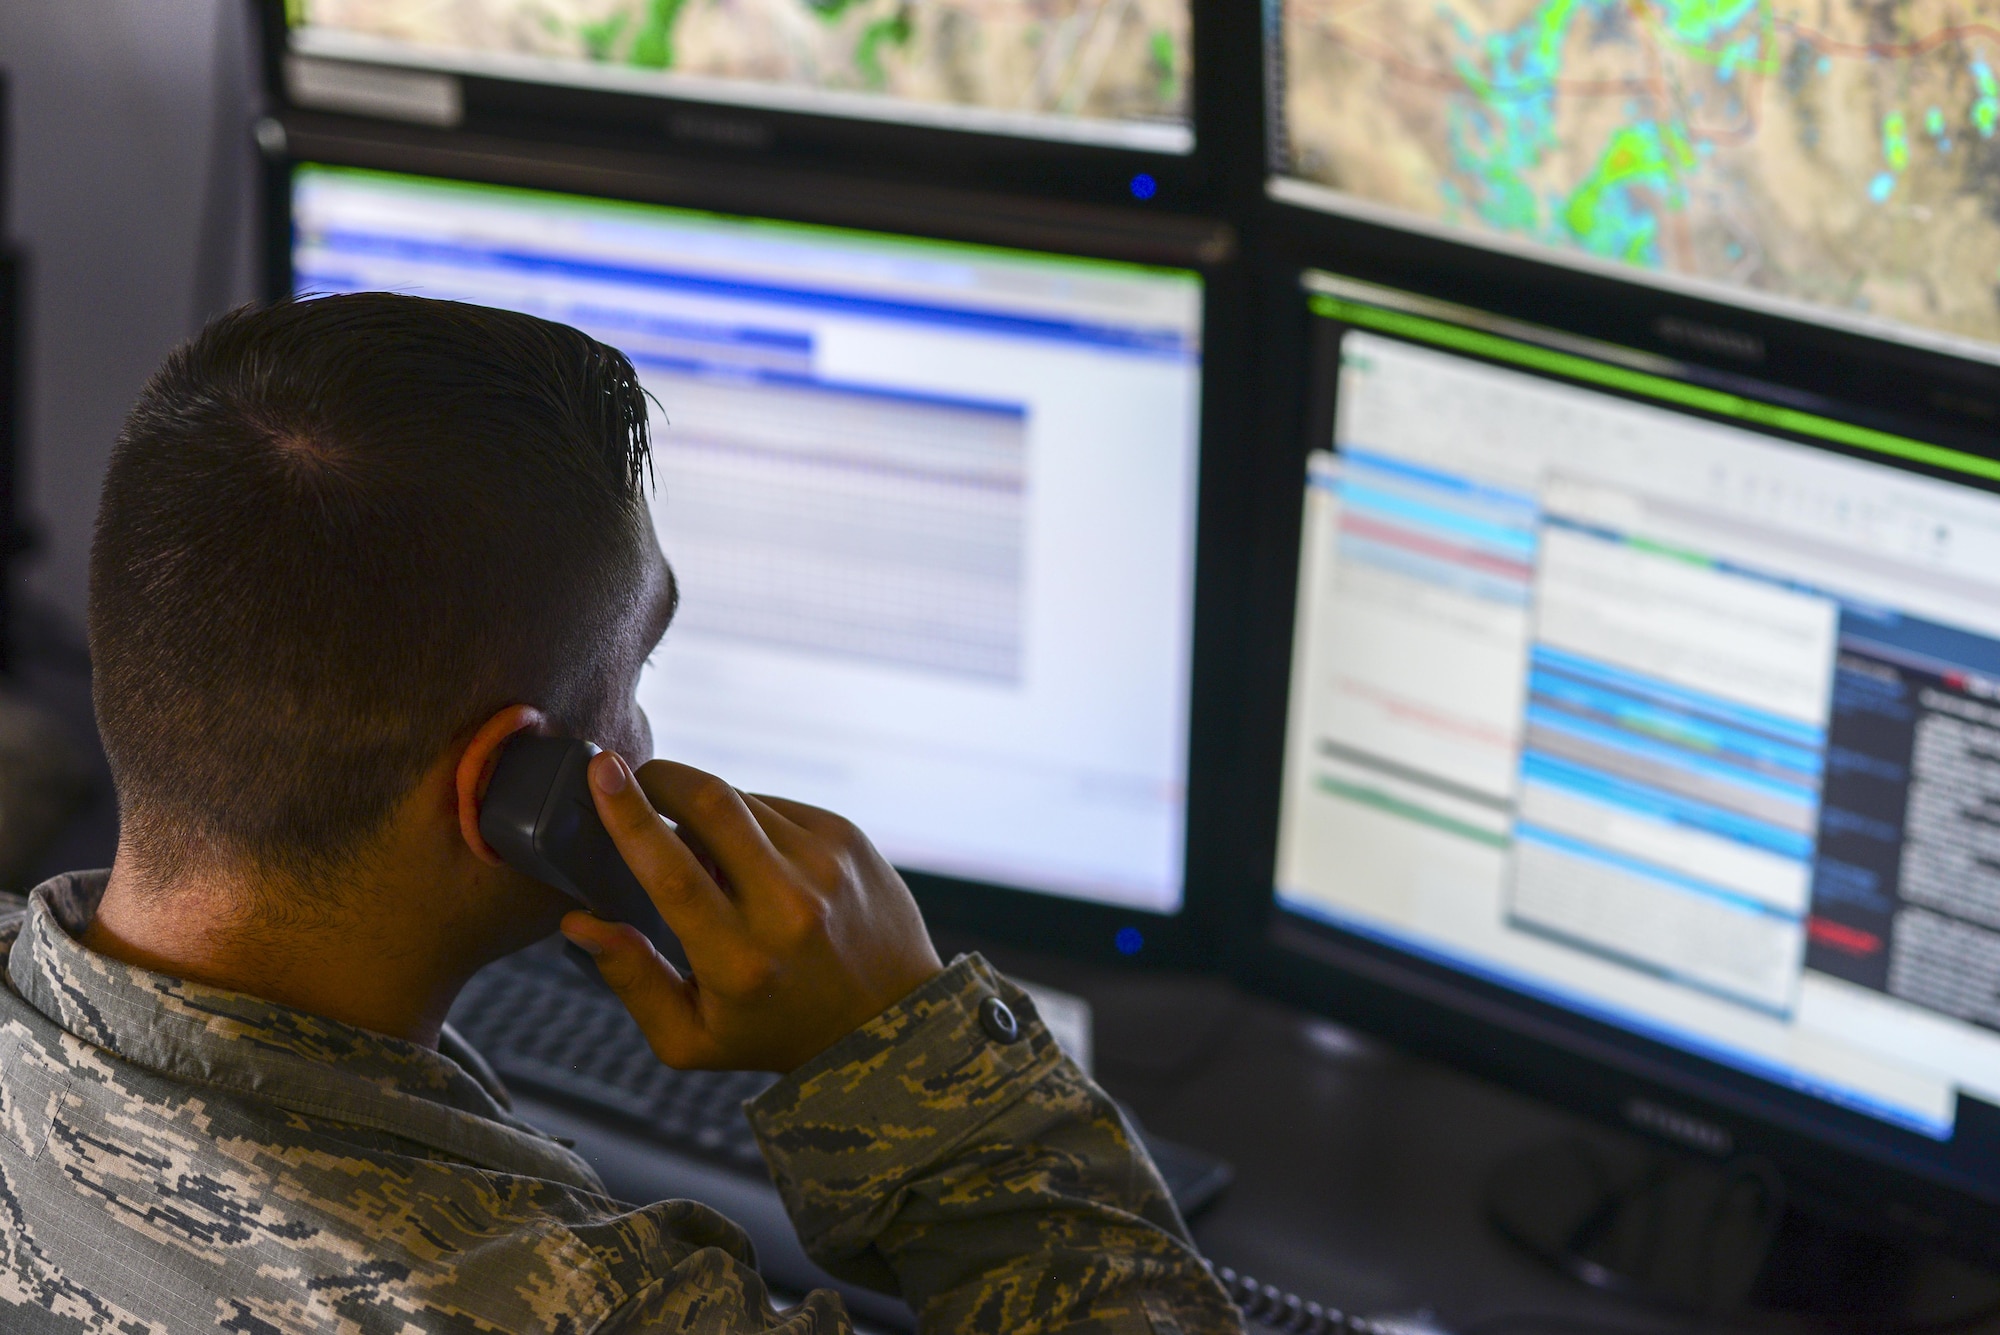 U.S. Air Force Airman 1st Class Cody Leahy, 25th Operational Weather Squadron forecaster, answers a phone call at Davis-Monthan Air Force Base, Ariz., July 19, 2017. Leahy was responding to weather condition inquiries from Travis AFB, Calif.  (U.S. Air Force photo by Airman 1st Class Michael X. Beyer)